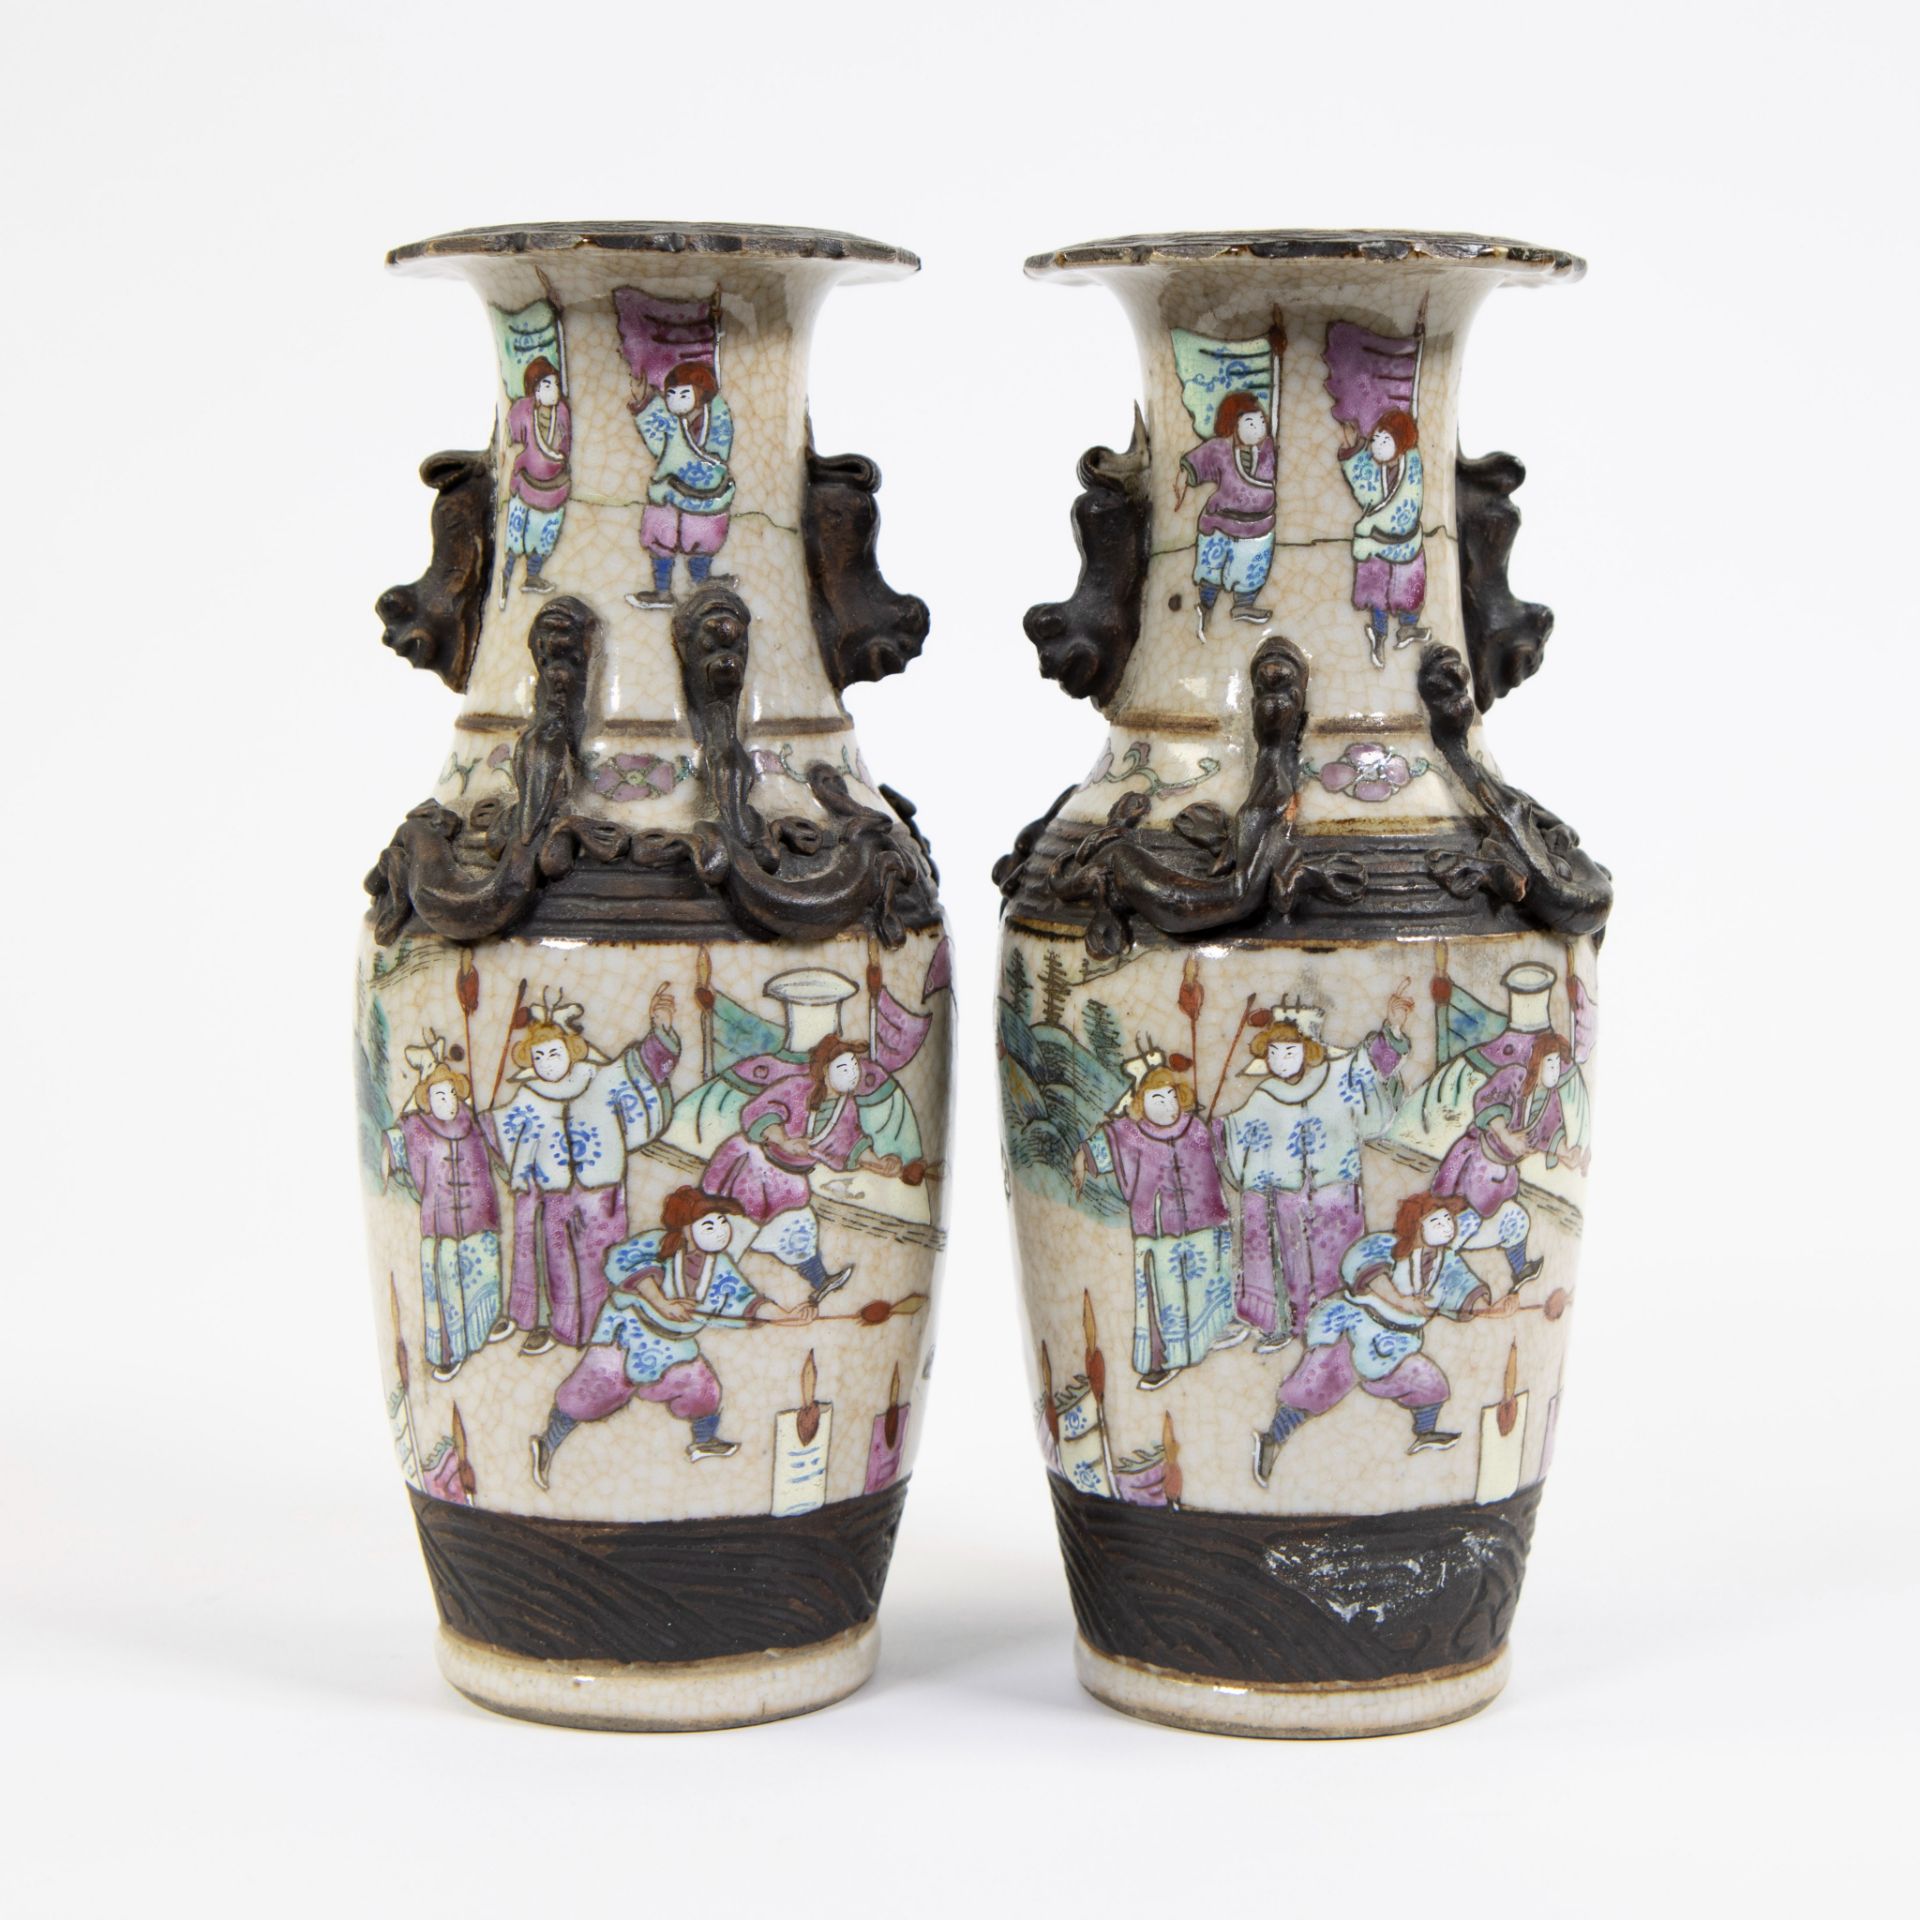 Collection of 2 Chinese Nankin vases, ca 1900